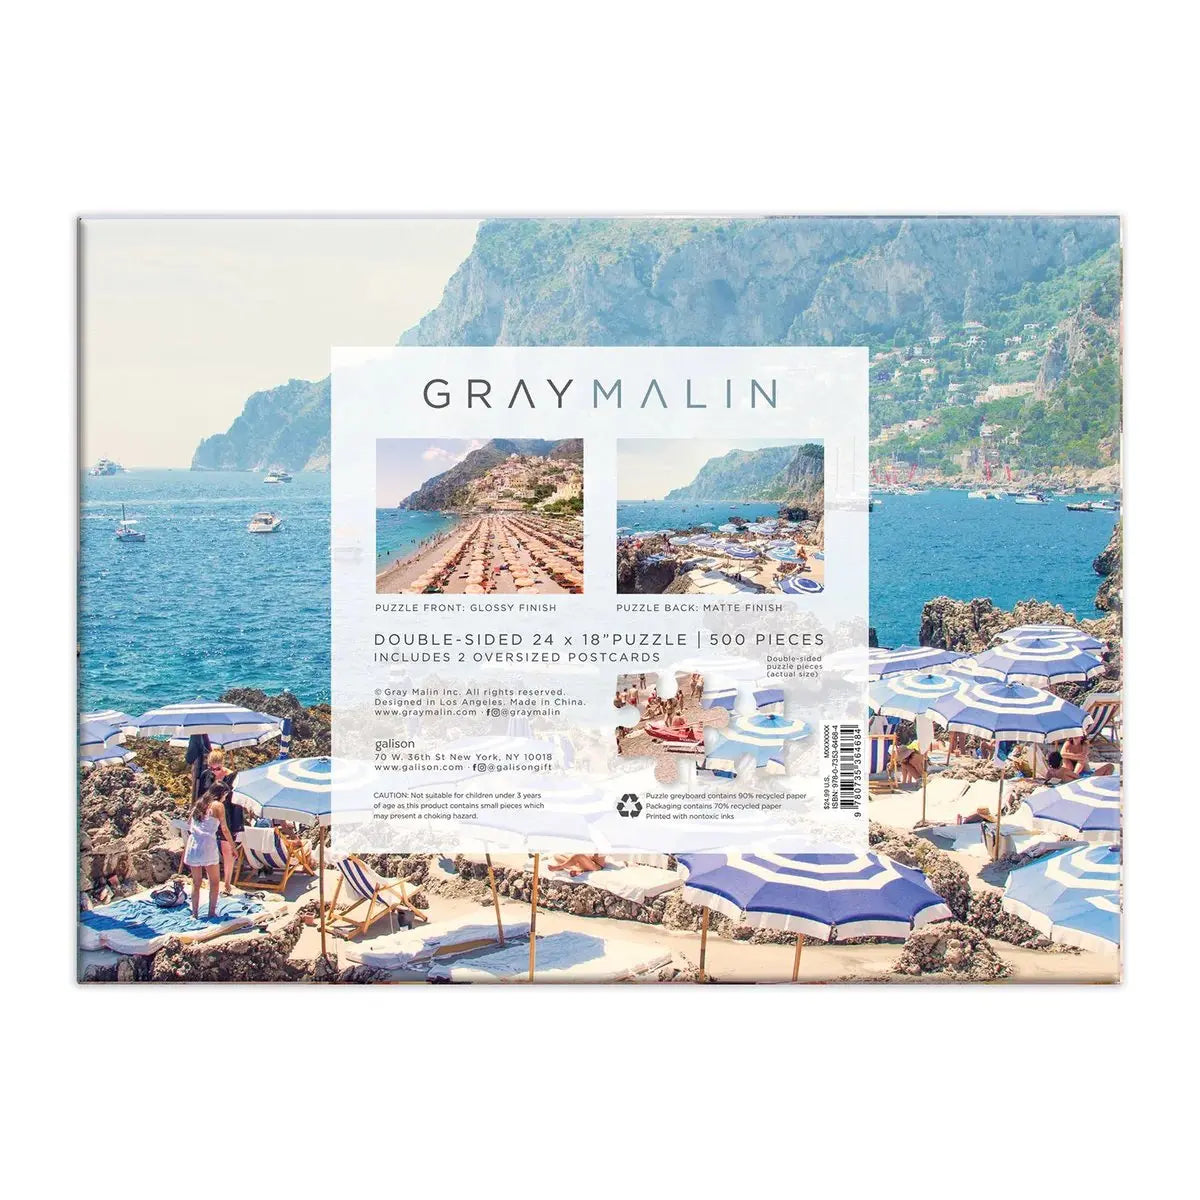 Hachette Gray Malin Italy 500 Piece Double Sided Puzzle 24 x 18 inch Puzzle Includes two oversized postcards